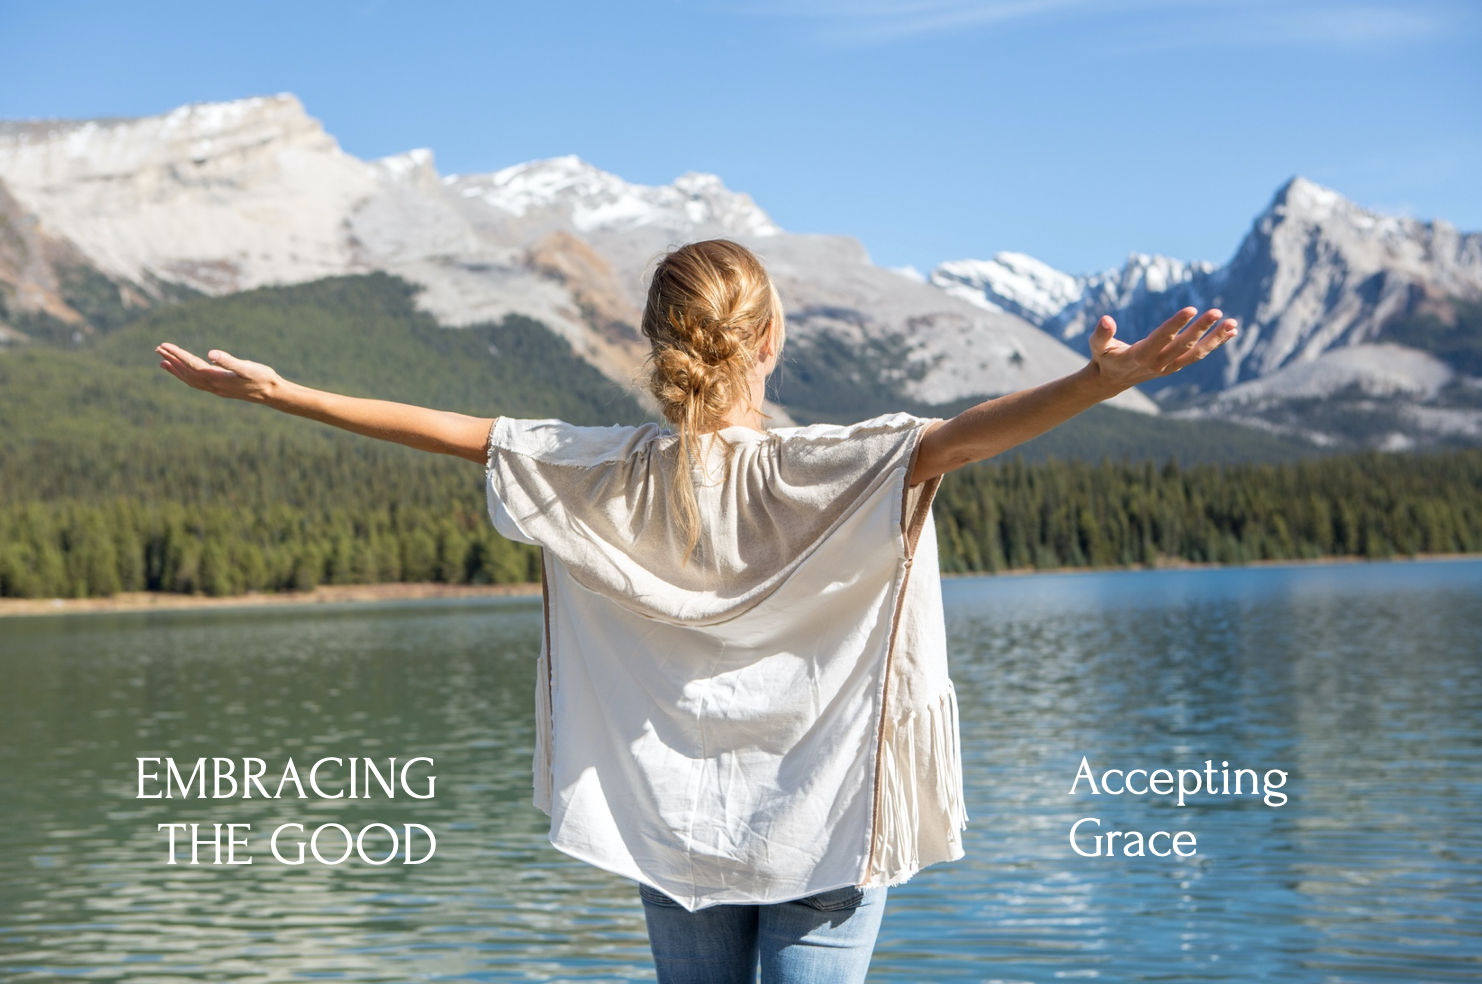 Accepting Grace